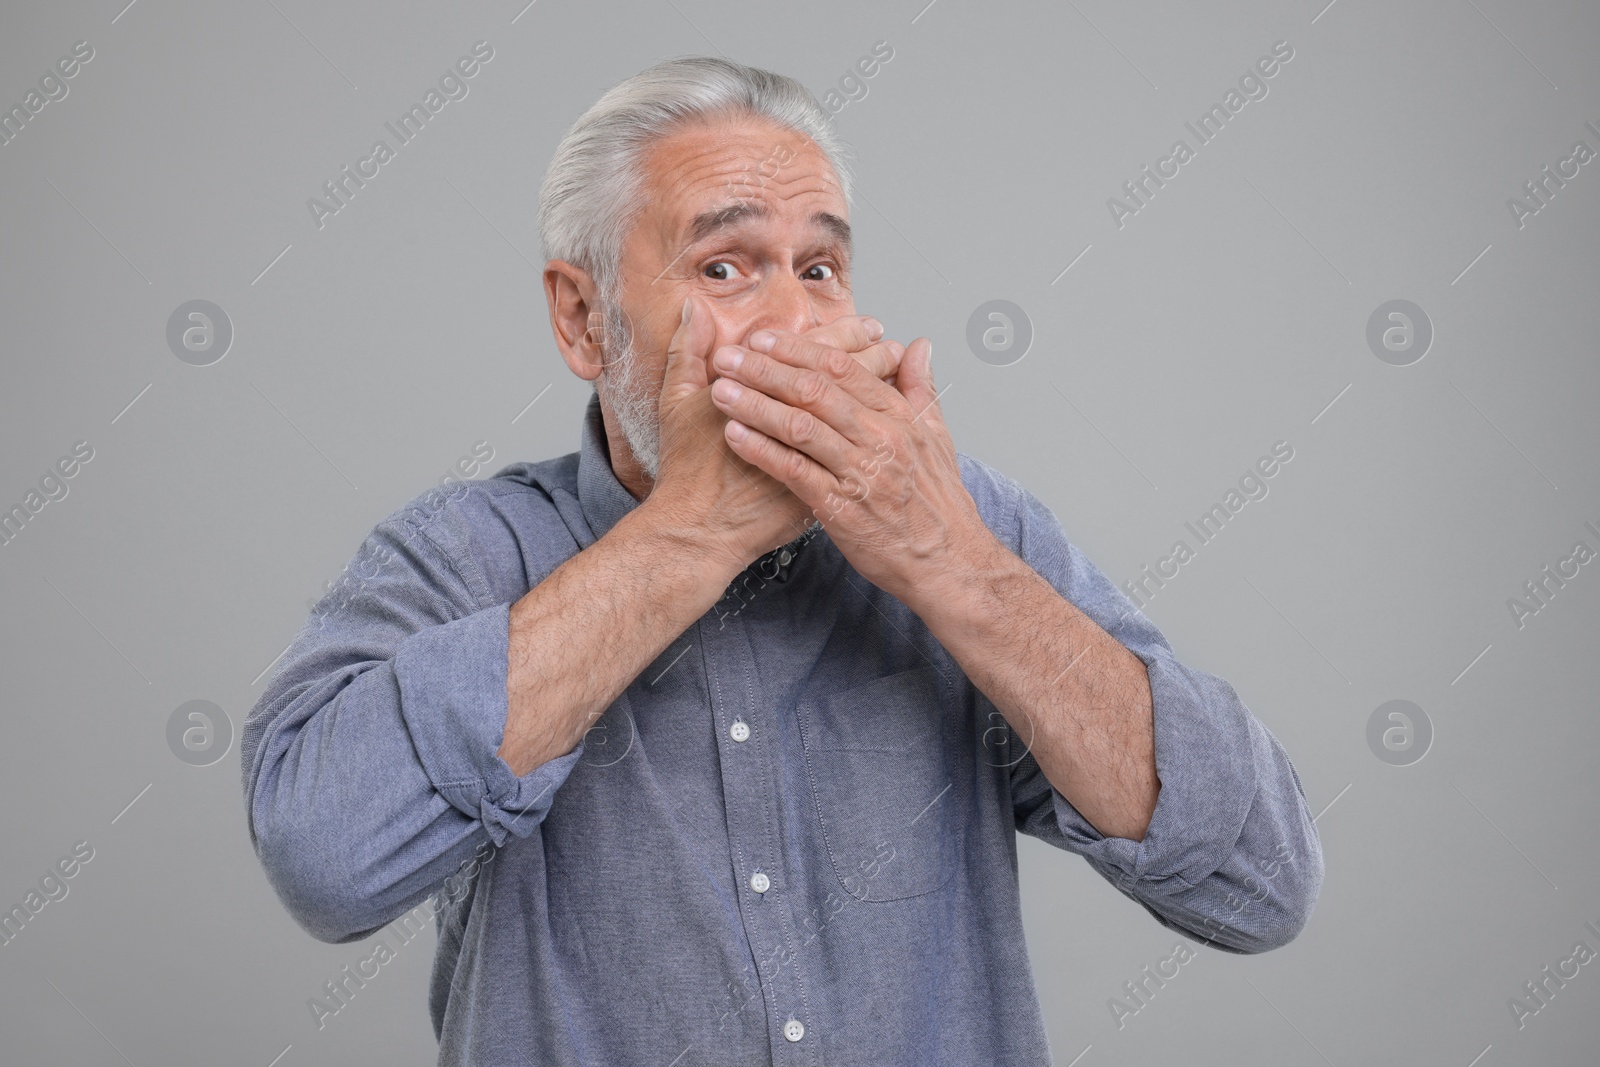 Photo of Embarrassed senior man covering mouth with hands on light grey background